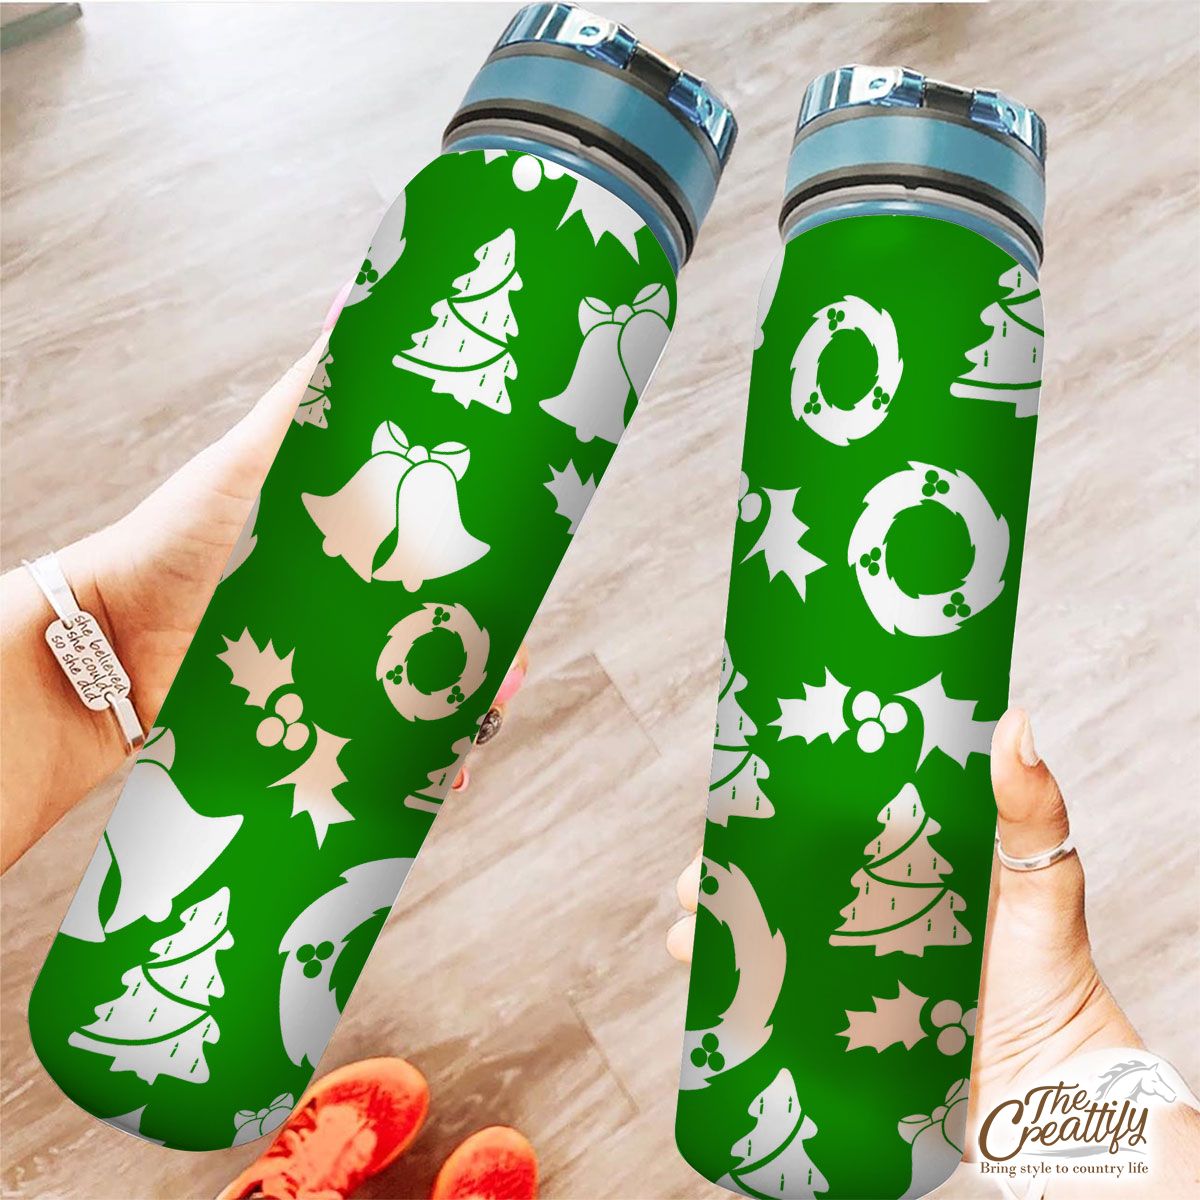 Christmas Wreath, Holly Leaf, Pine Tree And Bells On Green Tracker Bottle